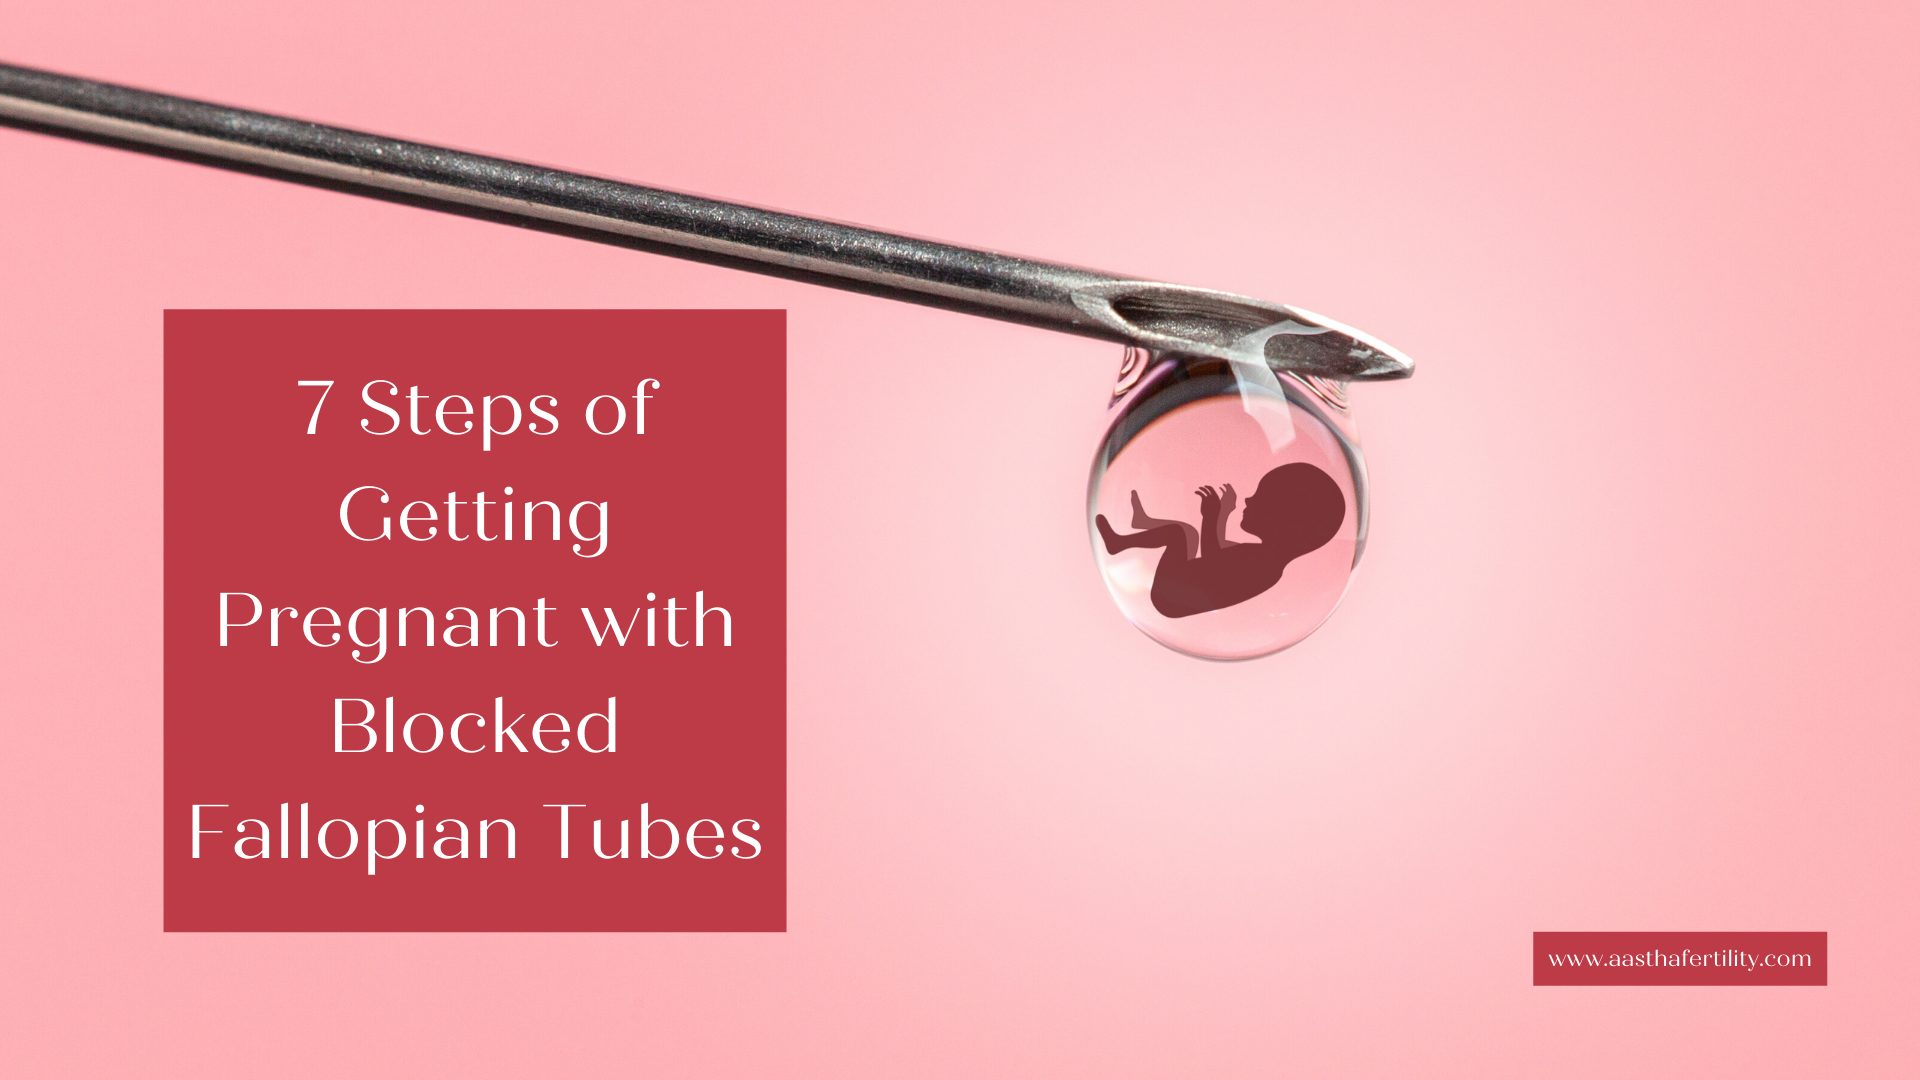 7 Steps of Getting Pregnant with Blocked Fallopian Tubes